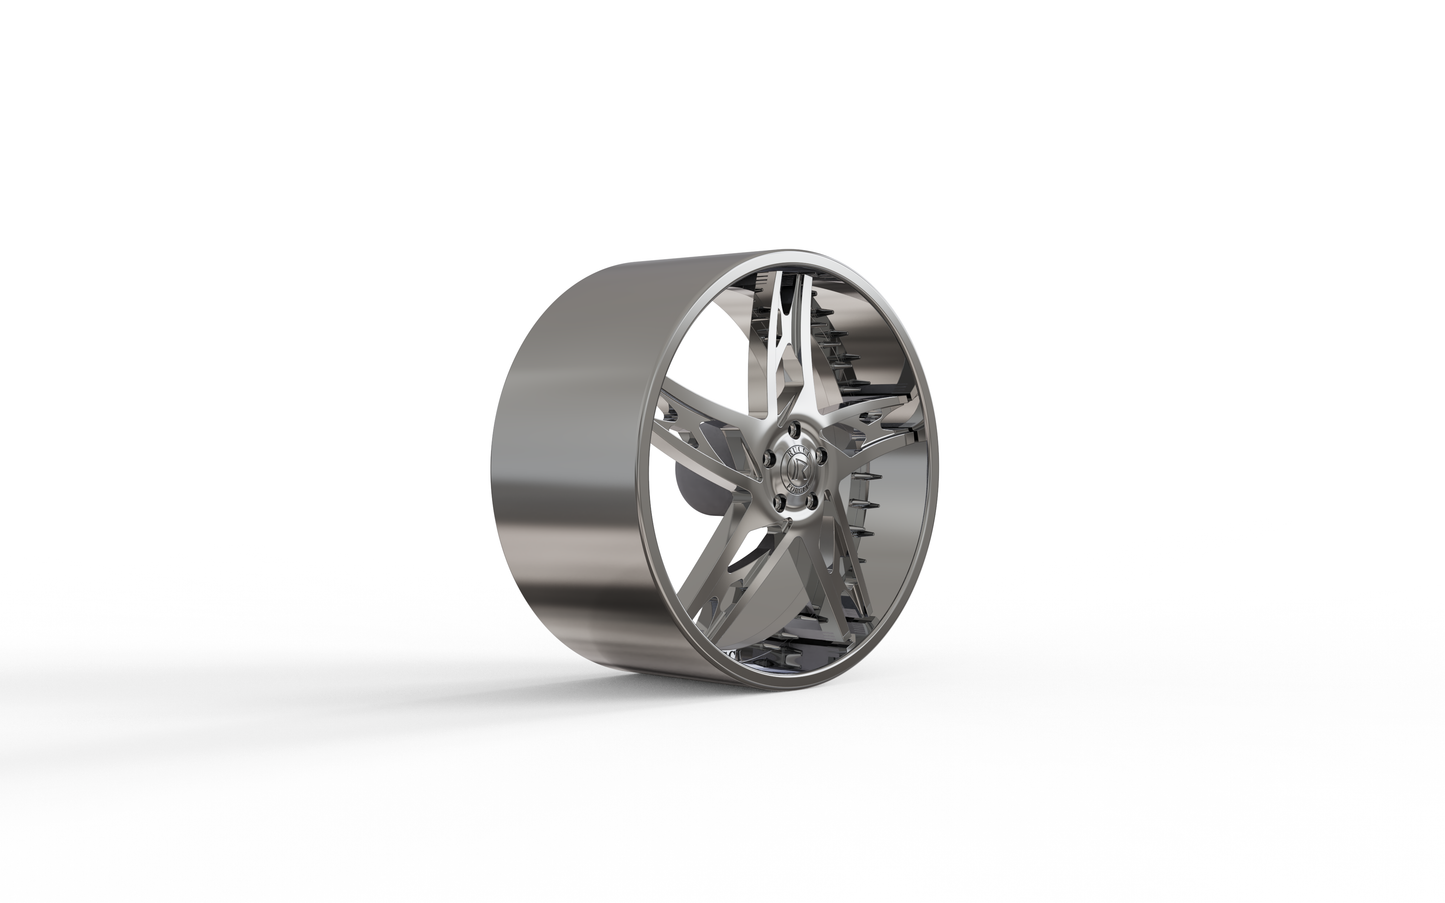 RUCCI FORGED CUERVO CONCAVE WHEEL 3D MODEL